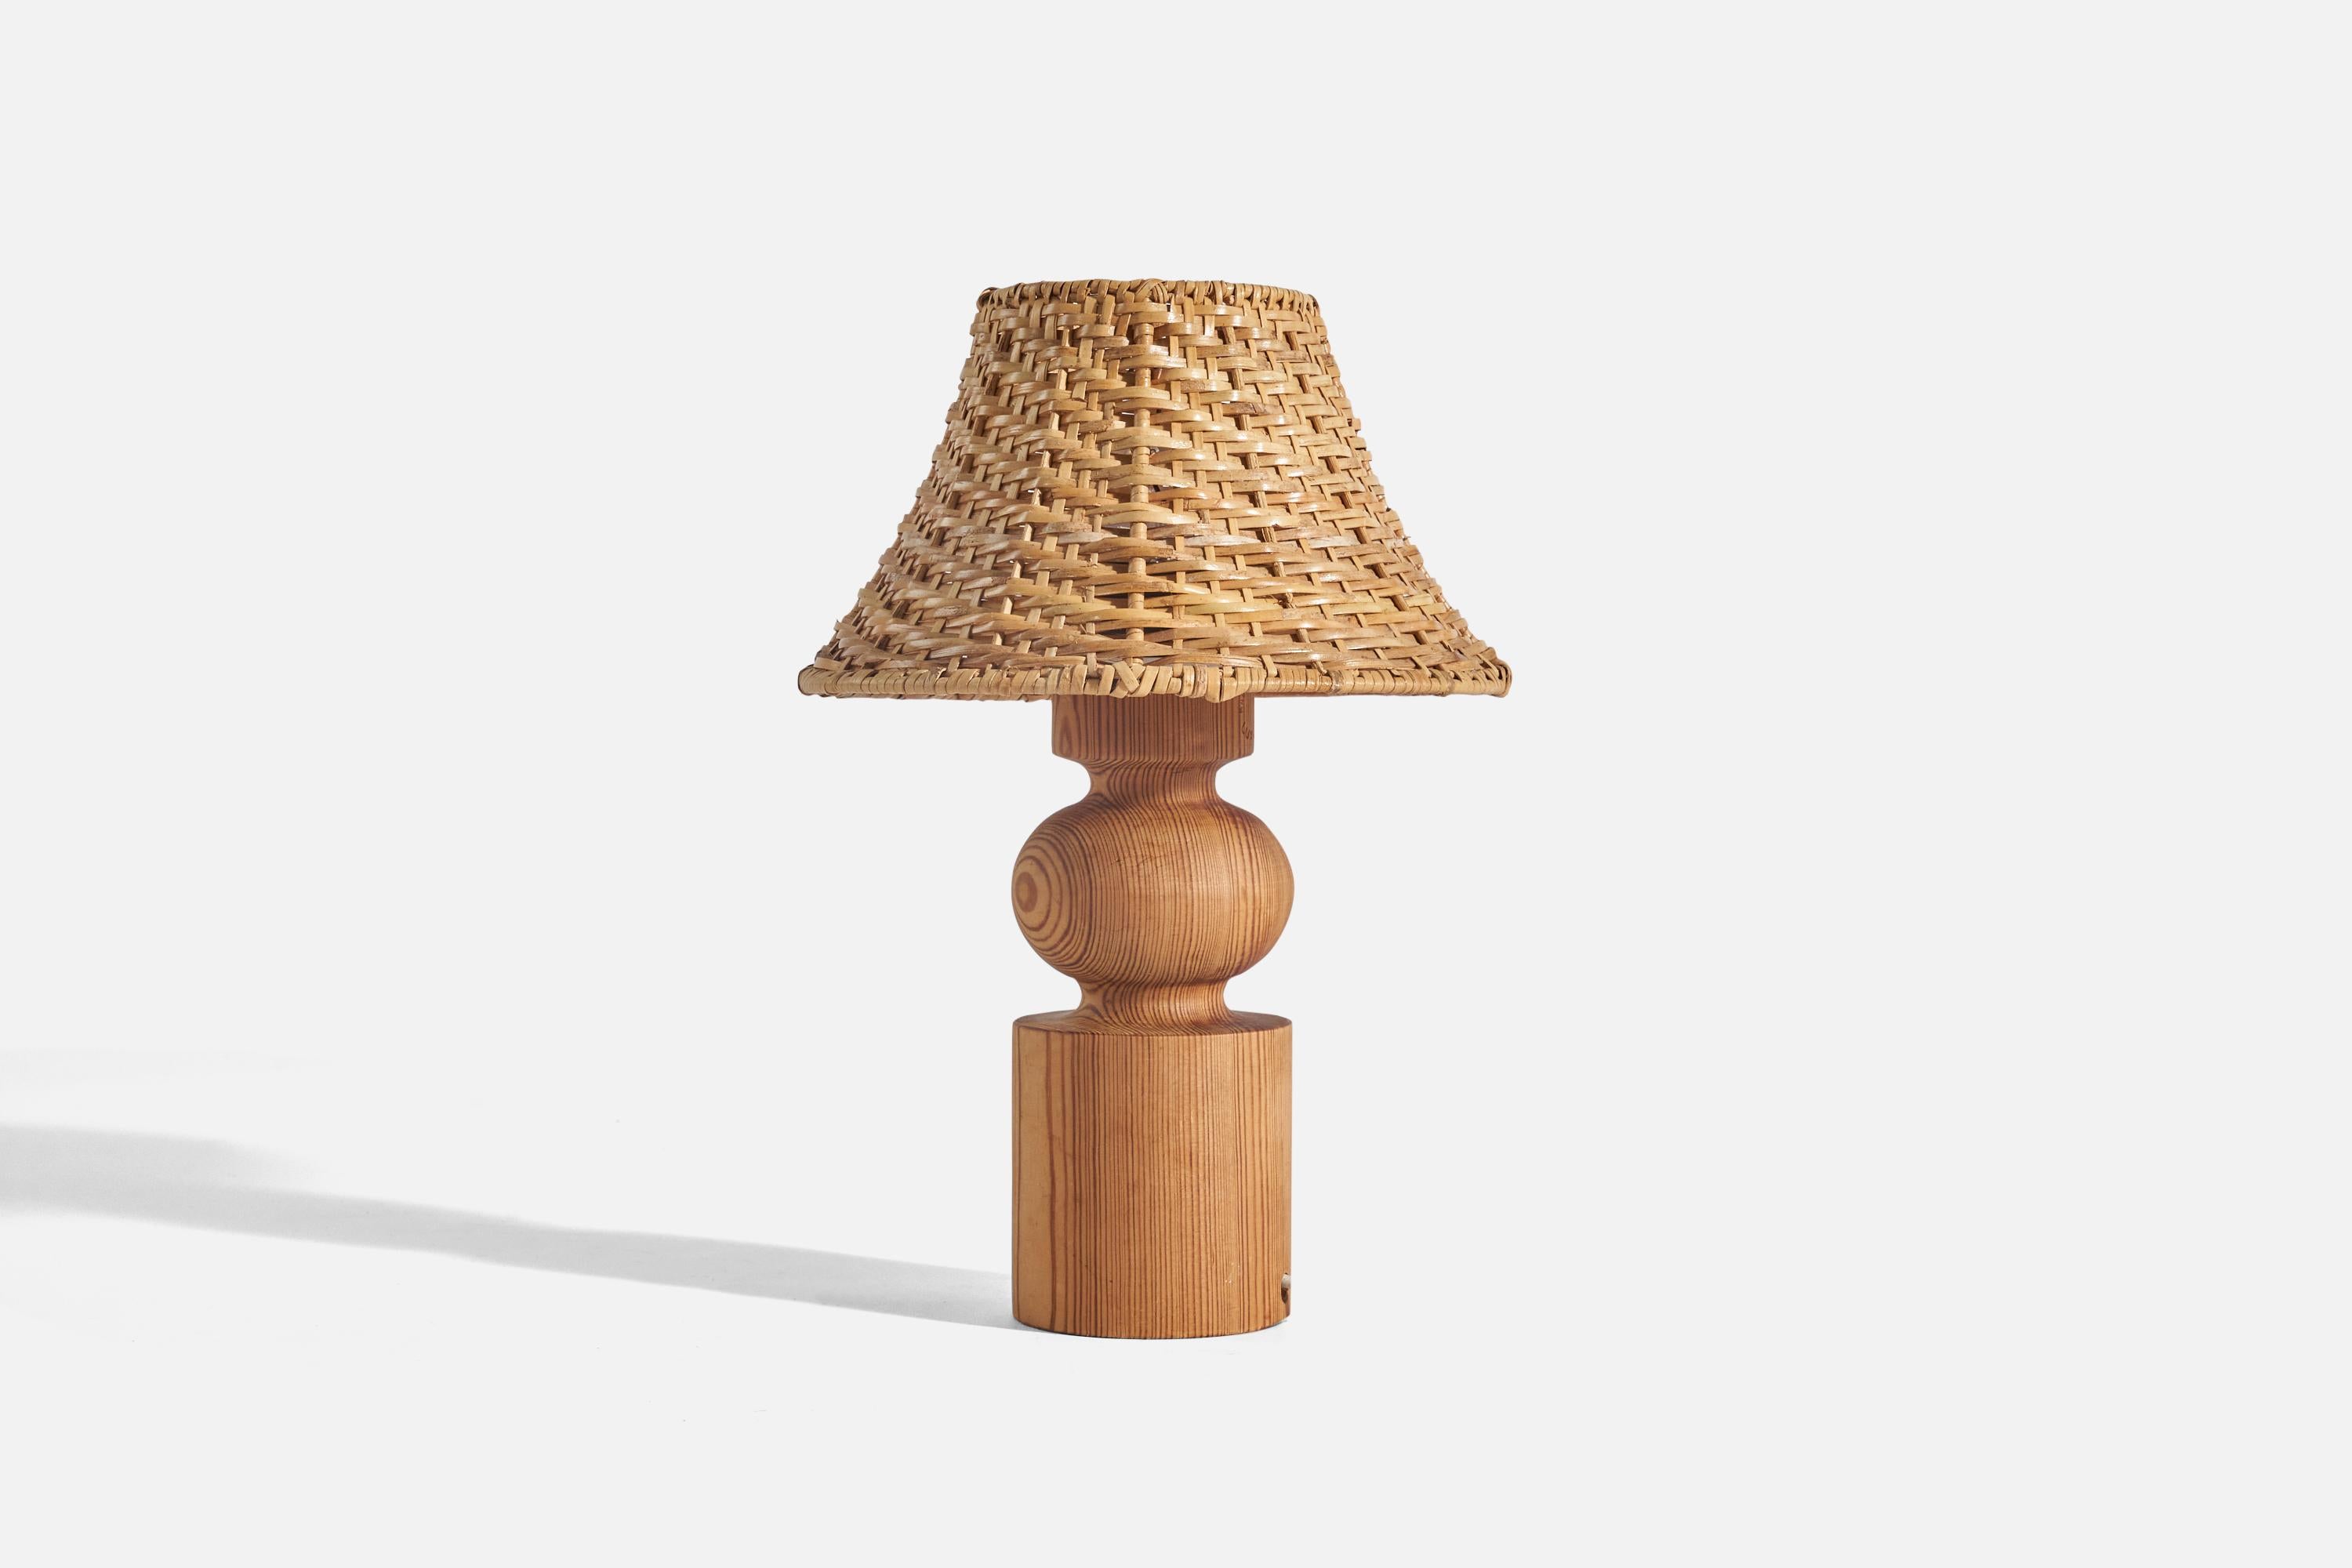 A pair of pine and rattan table lamps designed by Uno Kristiansson and produced by Luxus, Sweden, 1970s.

Sold with Lampshade(s). 
Stated dimensions refer to the Lamp(s) with the Shade(s). 

Socket takes standard E-26 medium base bulb.
There